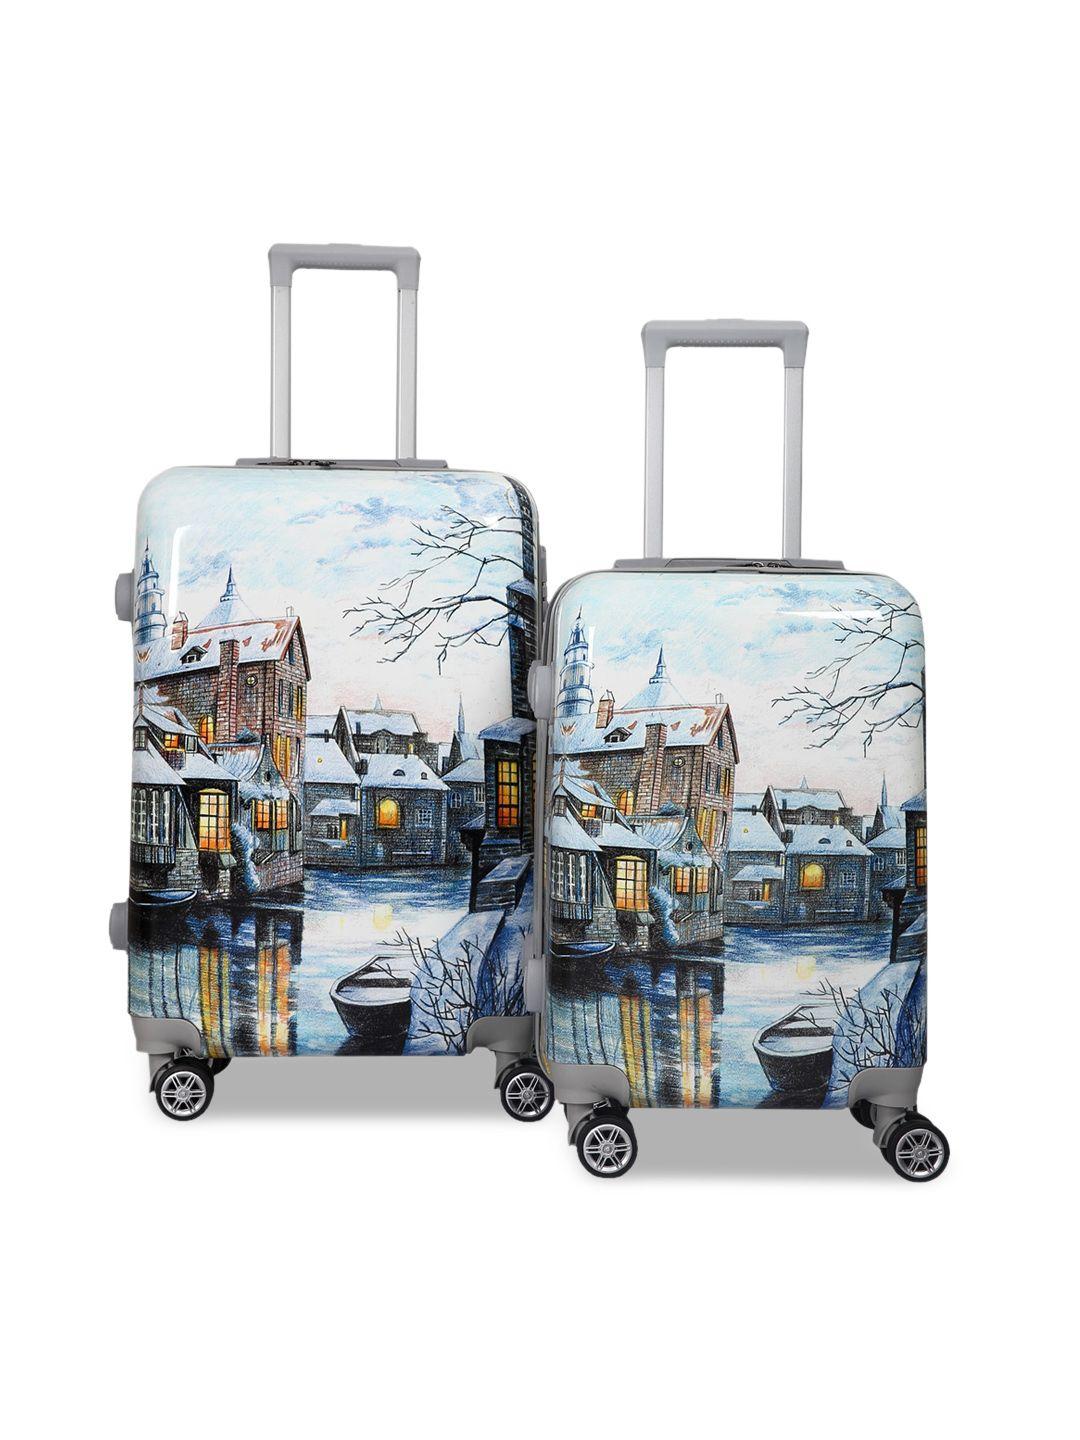 polo class set of 2 white & blue printed hard-sided trolley suitcases